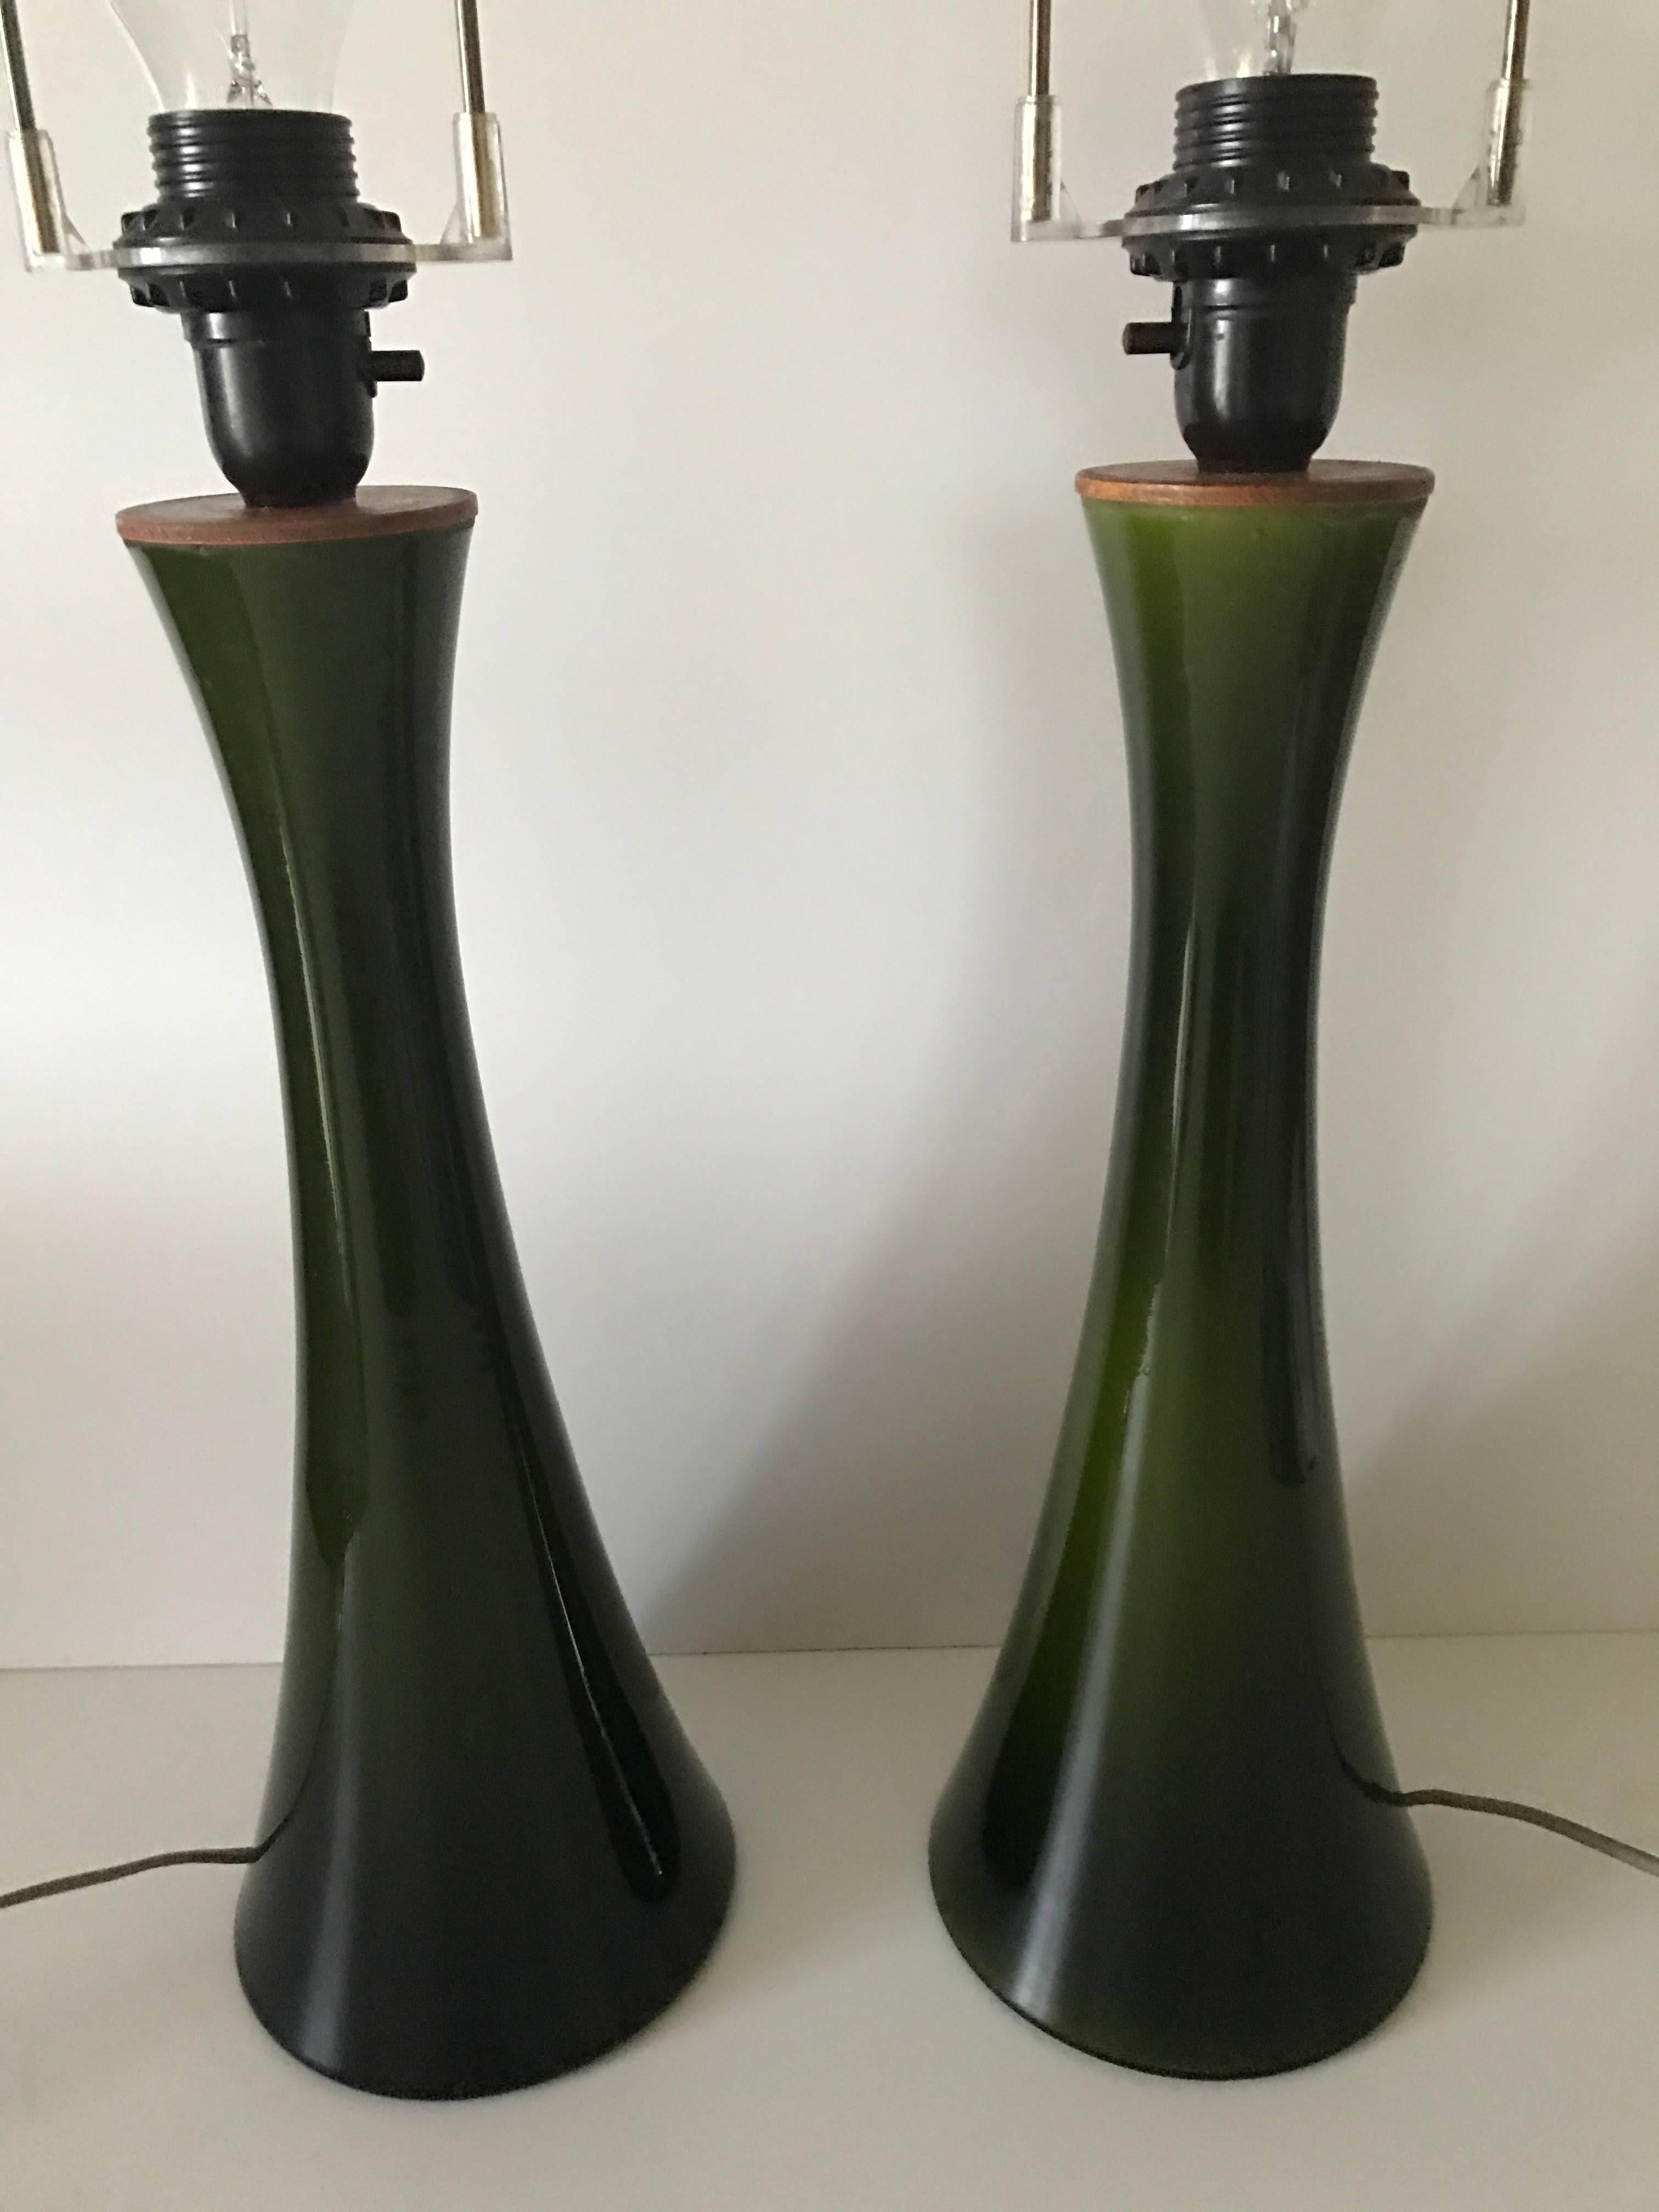 Pair of large 1950 Swedish Bergbom dark green glass and teakwood table lamps,
Beautiful and large table lamps, design by Bergboms but manufactured by Danish Holmegaard in the 1950s. The glass have a beatiful dark green colour, which is hard to